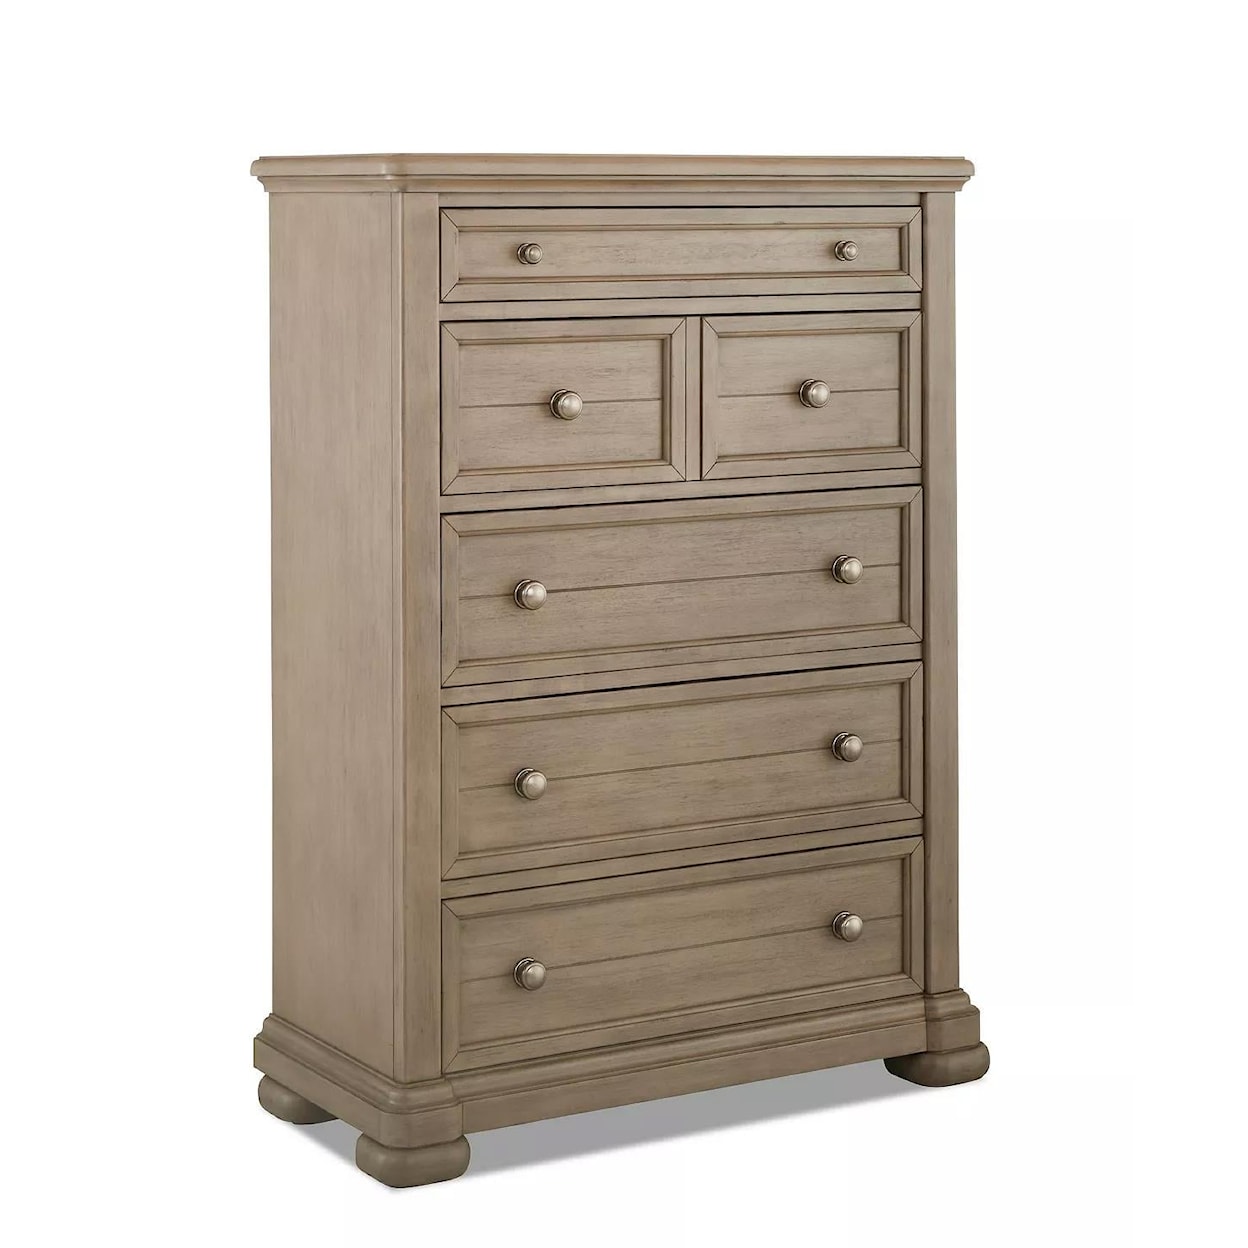 Trisha Yearwood Home Collection by Legacy Classic Nashville Drawer Chest